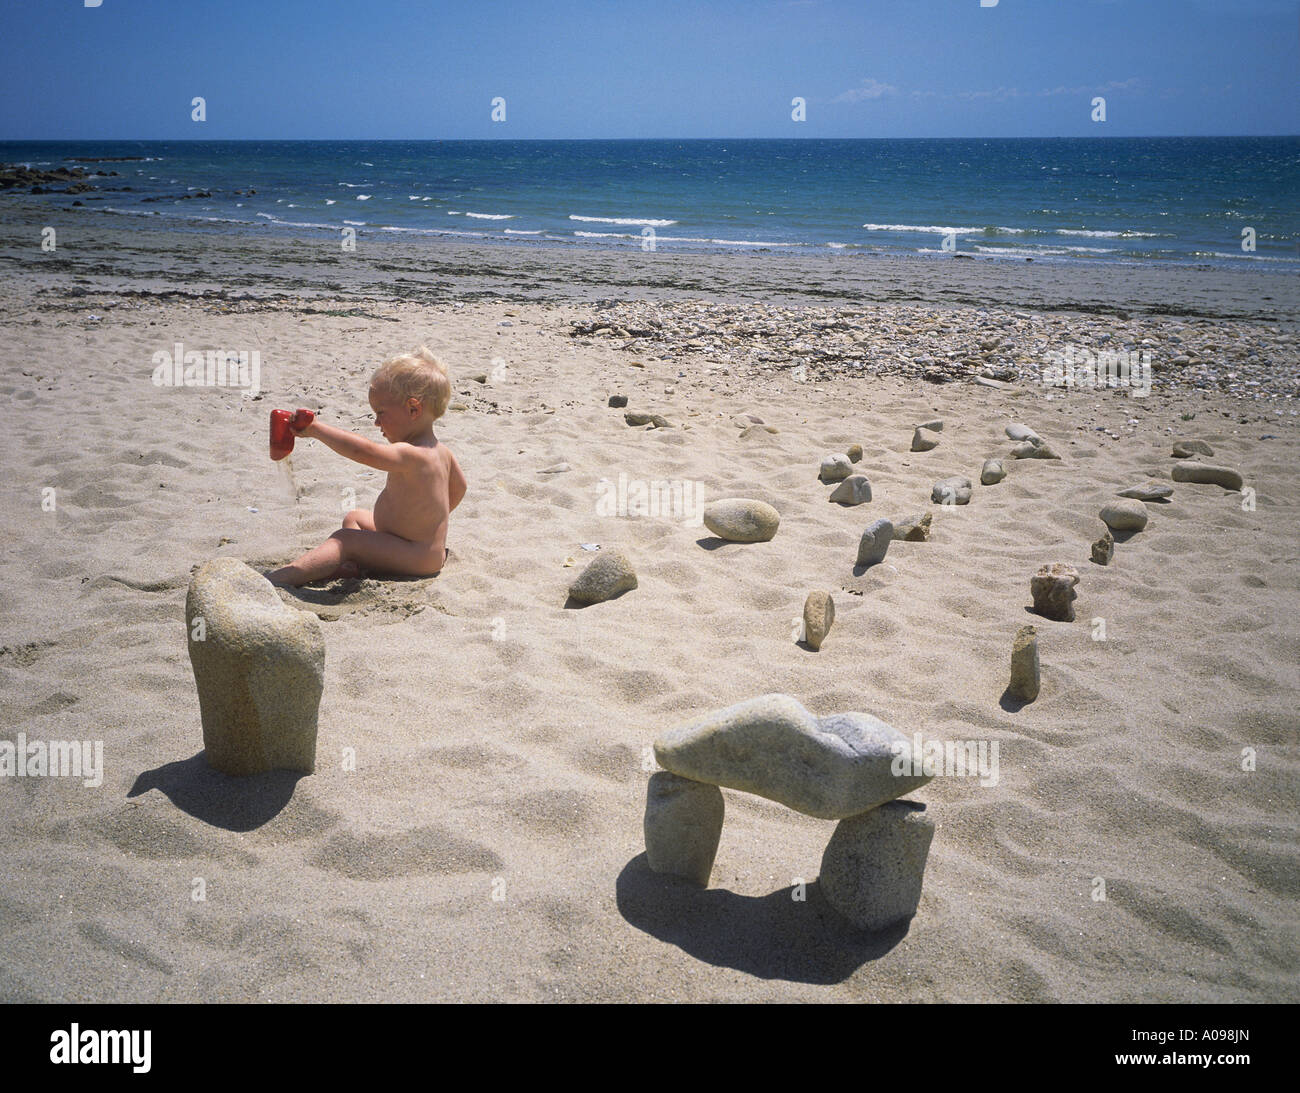 Young boy playing on the white sandy beach at Carnac with pretend megaliths Stock Photo